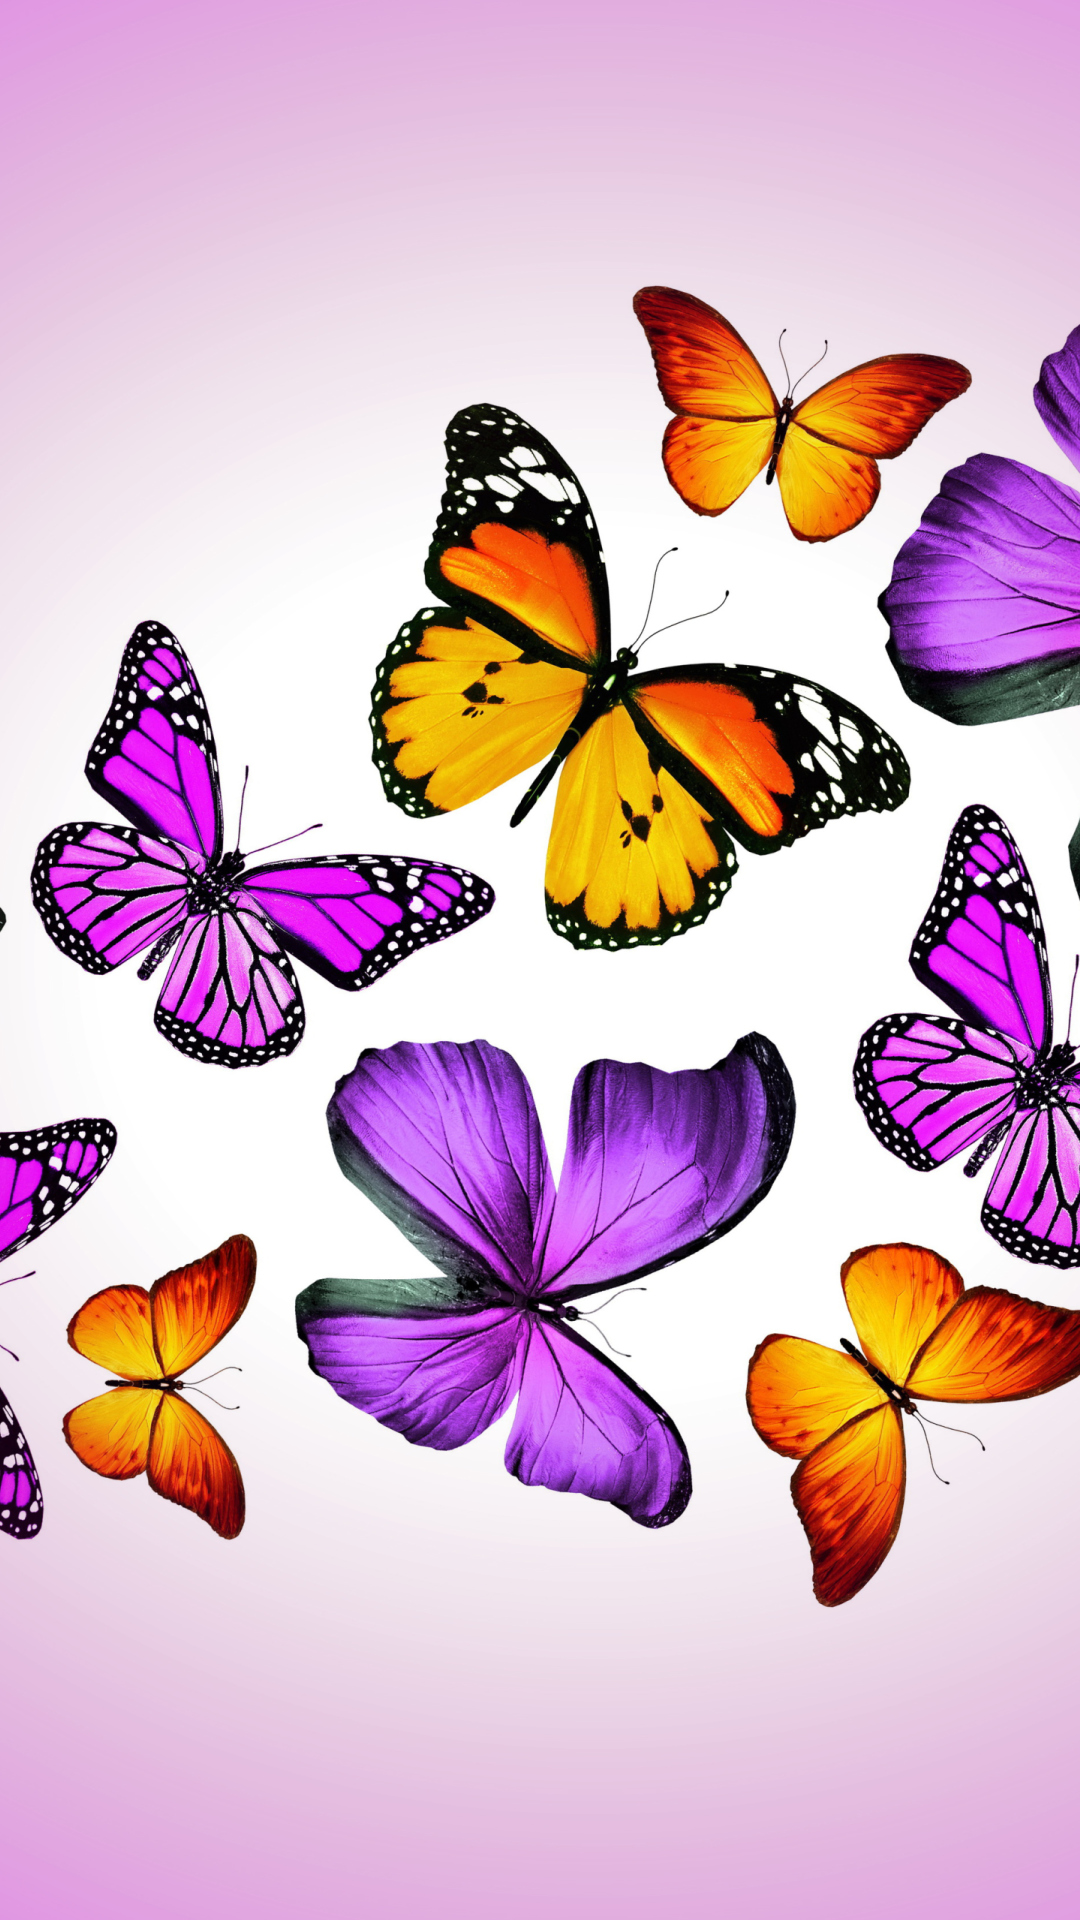 Orange And Purple Butterflies Wallpaper for iPhone 8 Plus